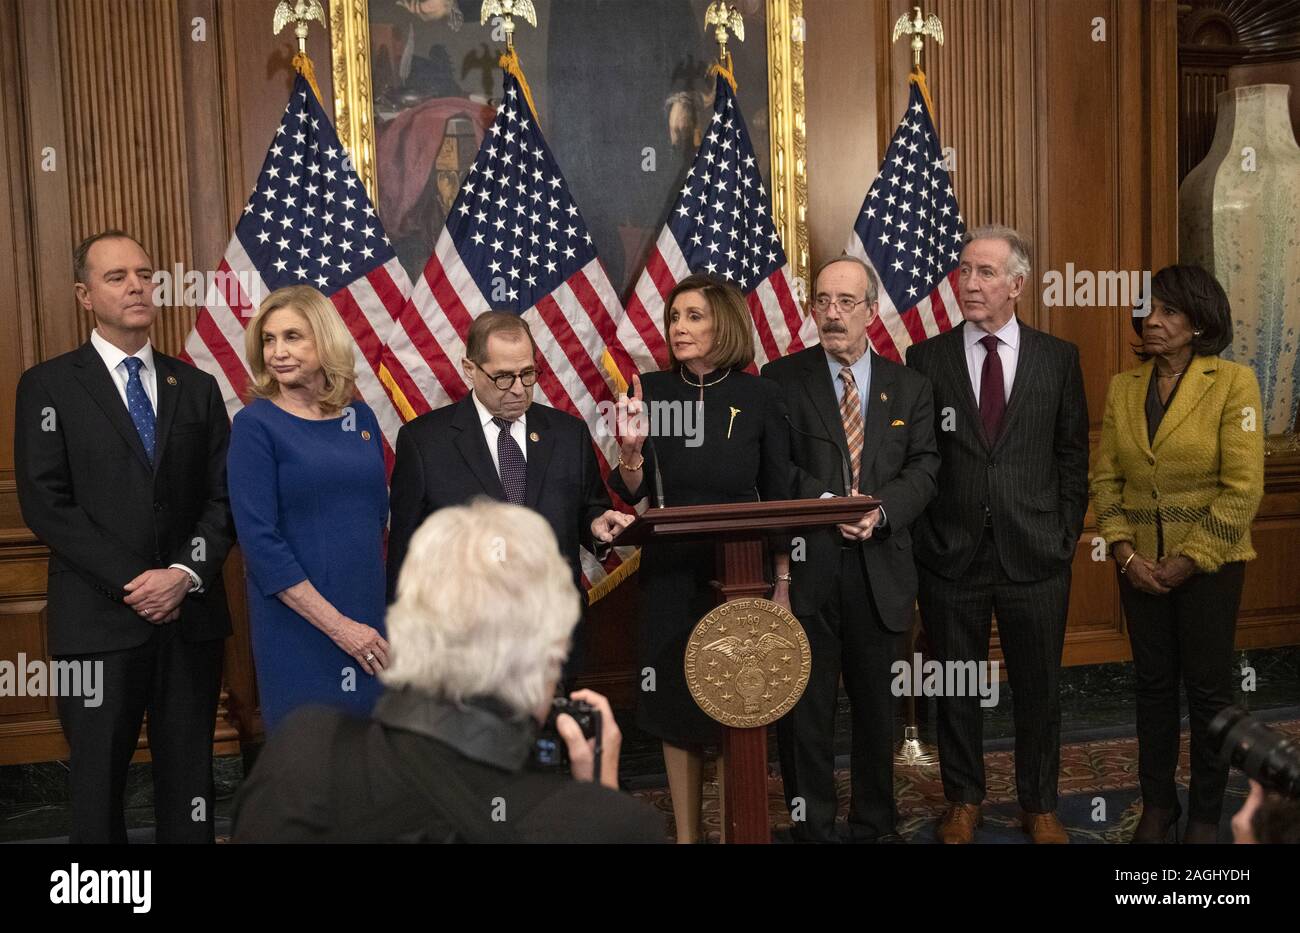 December 18, 2019, Washington, District of Columbia, USA: Speaker of the United States House of Representatives Nancy Pelosi (Democrat of California), center, holds a press conference following the vote on the two articles of impeachment against US President Donald J. Trump in the US Capitol in Washington, DC on Wednesday, December 18, 2019. From left to right: United States Representative Adam Schiff (Democrat of California), Chairman, US House Permanent Select Committee on Intelligence; United States Representative Carolyn Maloney (Democrat of New York), Chair, US House Oversight Committee; Stock Photo